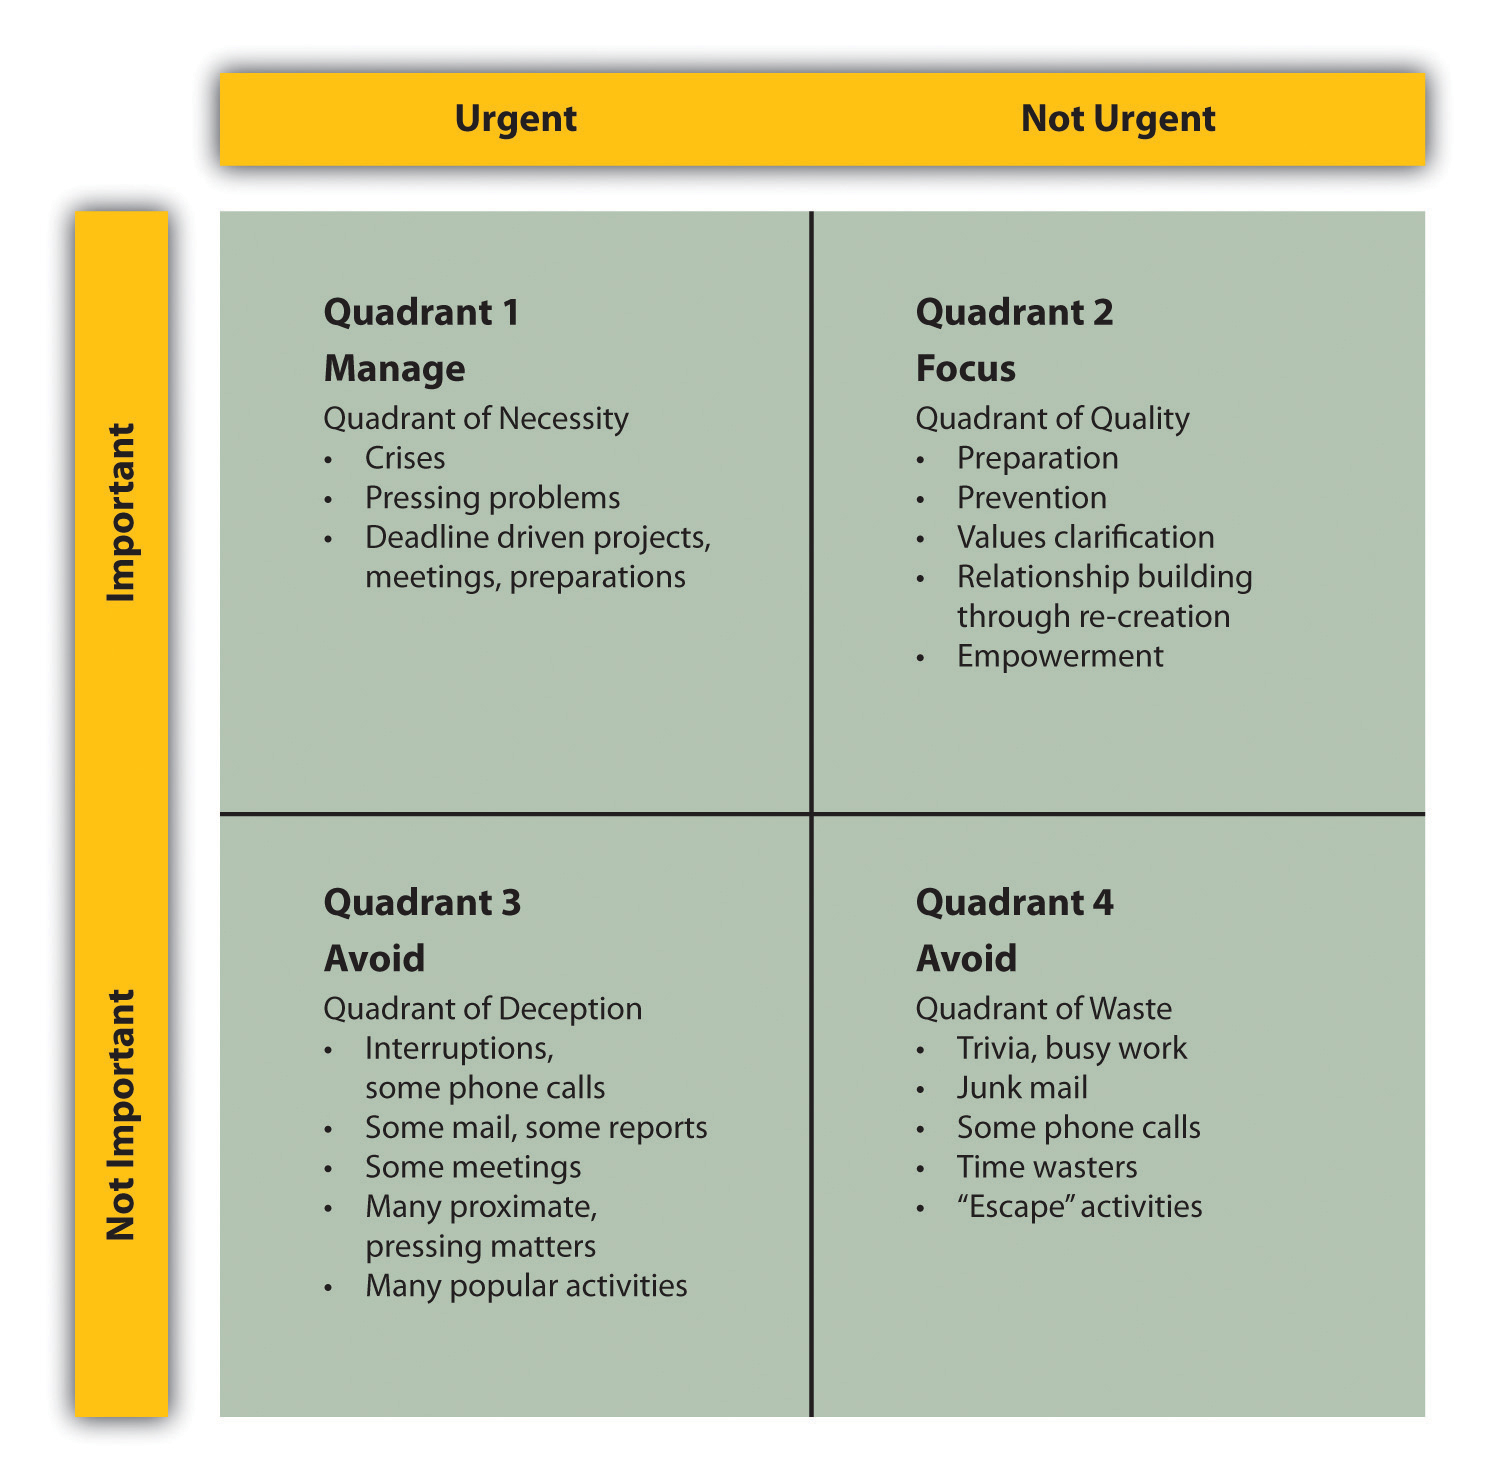 The Time-Management Matrix explains prioritizing using the values of urgency and importance. The first quadrant is valued as important and urgent. This quadrant is labeled the quadrant of necessity. The second quadrant is not urgent however it is important, it is the quadrant of quality. The third quadrant is urgent but not important. It is the quadrant of deception. The fourth quadrant is not urgent or important and is, therefore, the quadrant of waste.